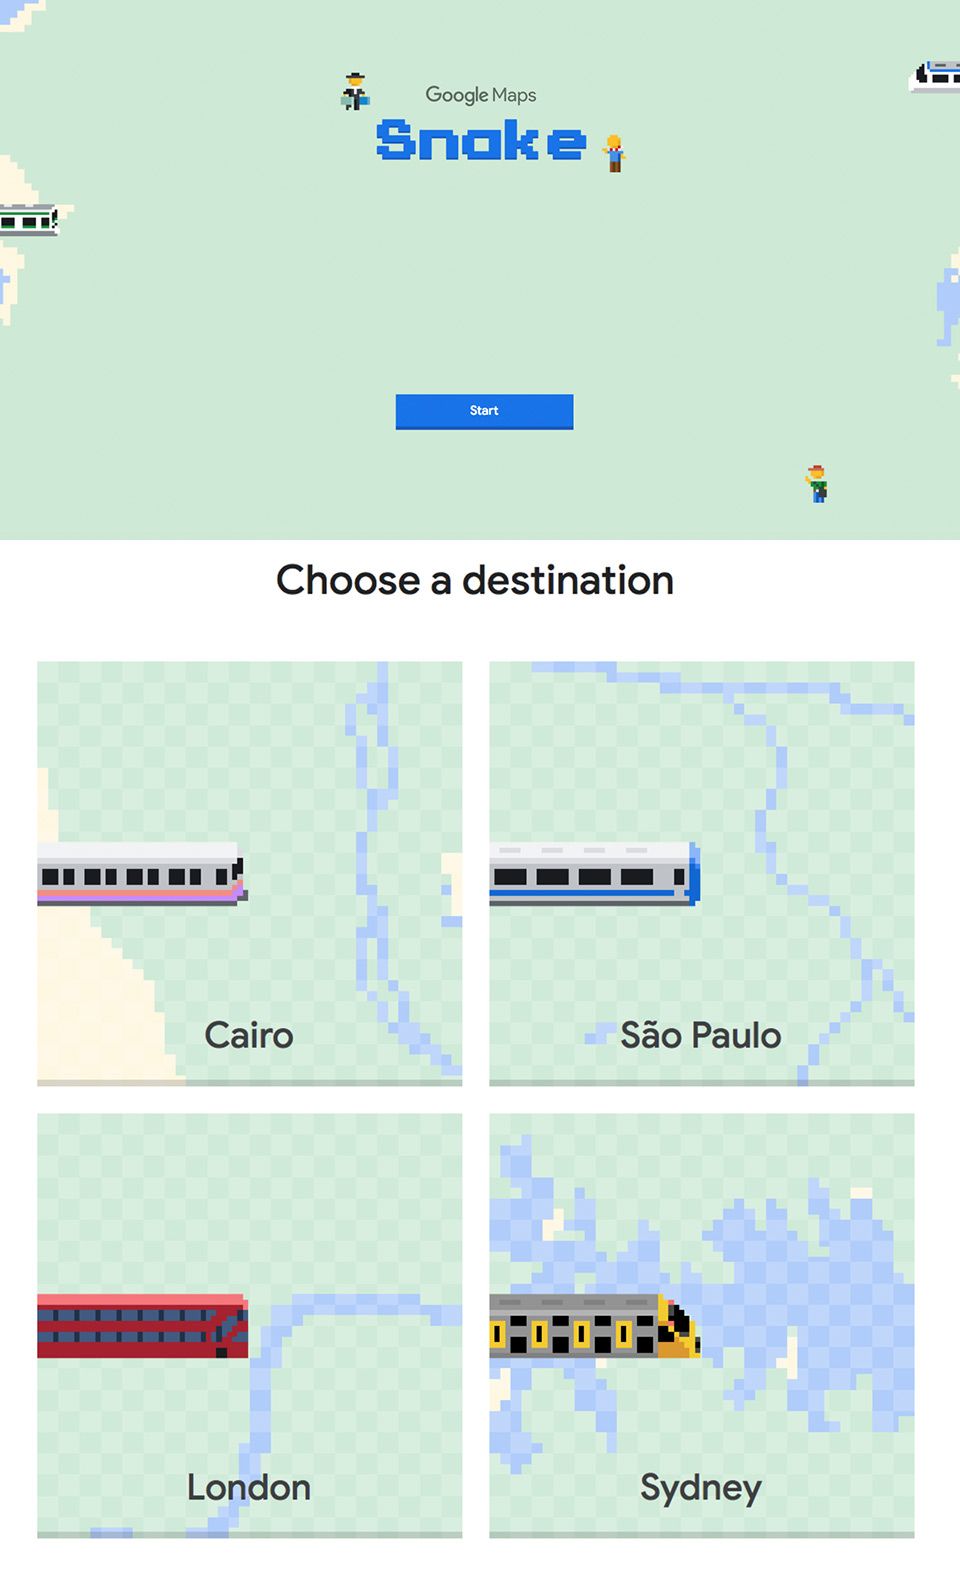 How To Play Classic 'Snake' Game With Google Maps April Fools' Easter Egg